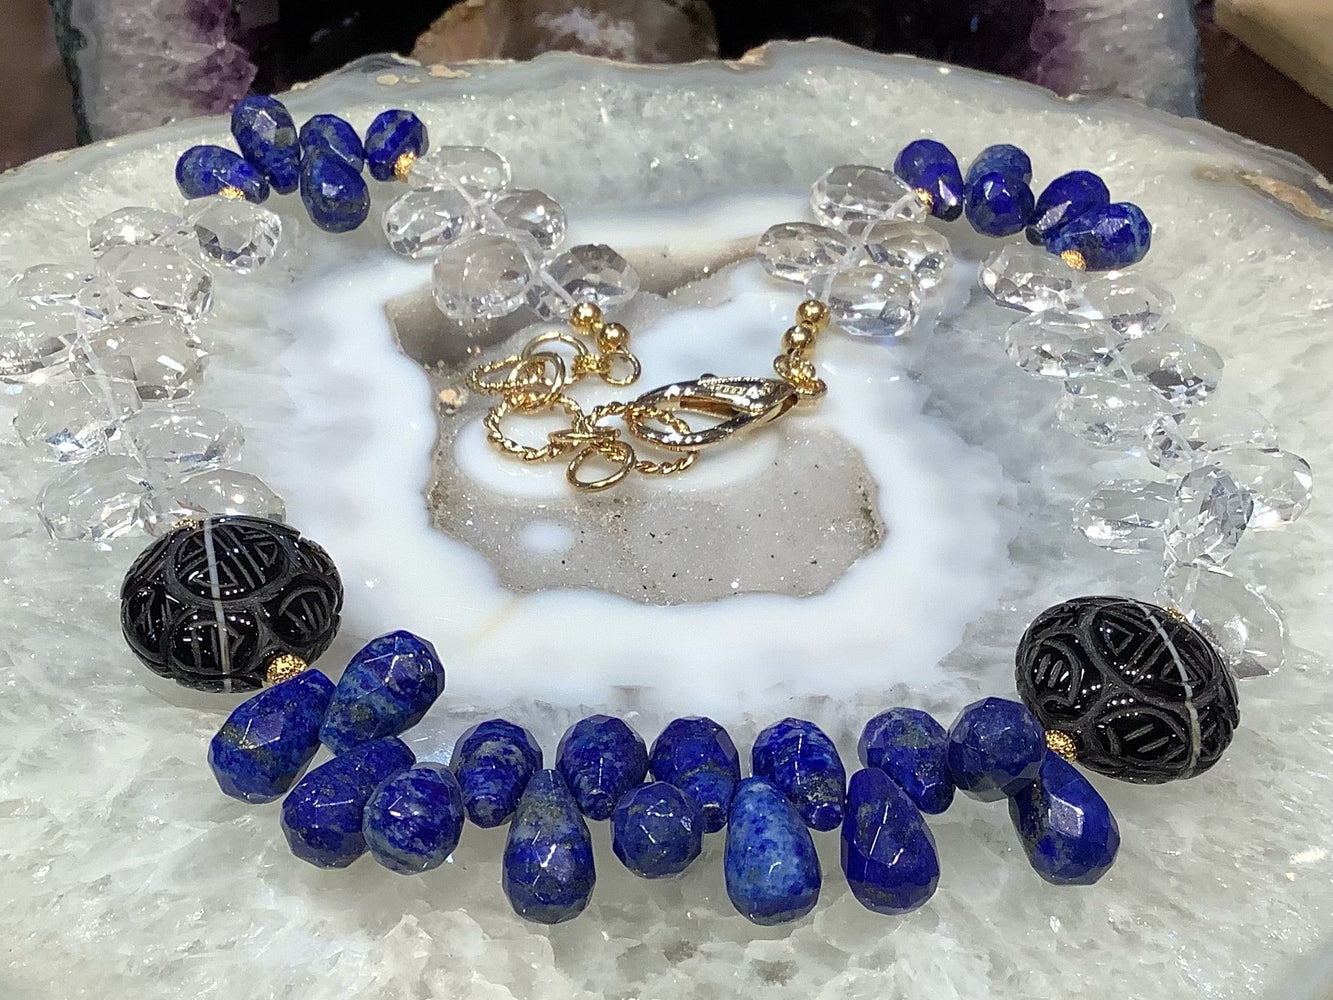 Rock Crystal, Black Agate and Lapis Lazuli Necklace